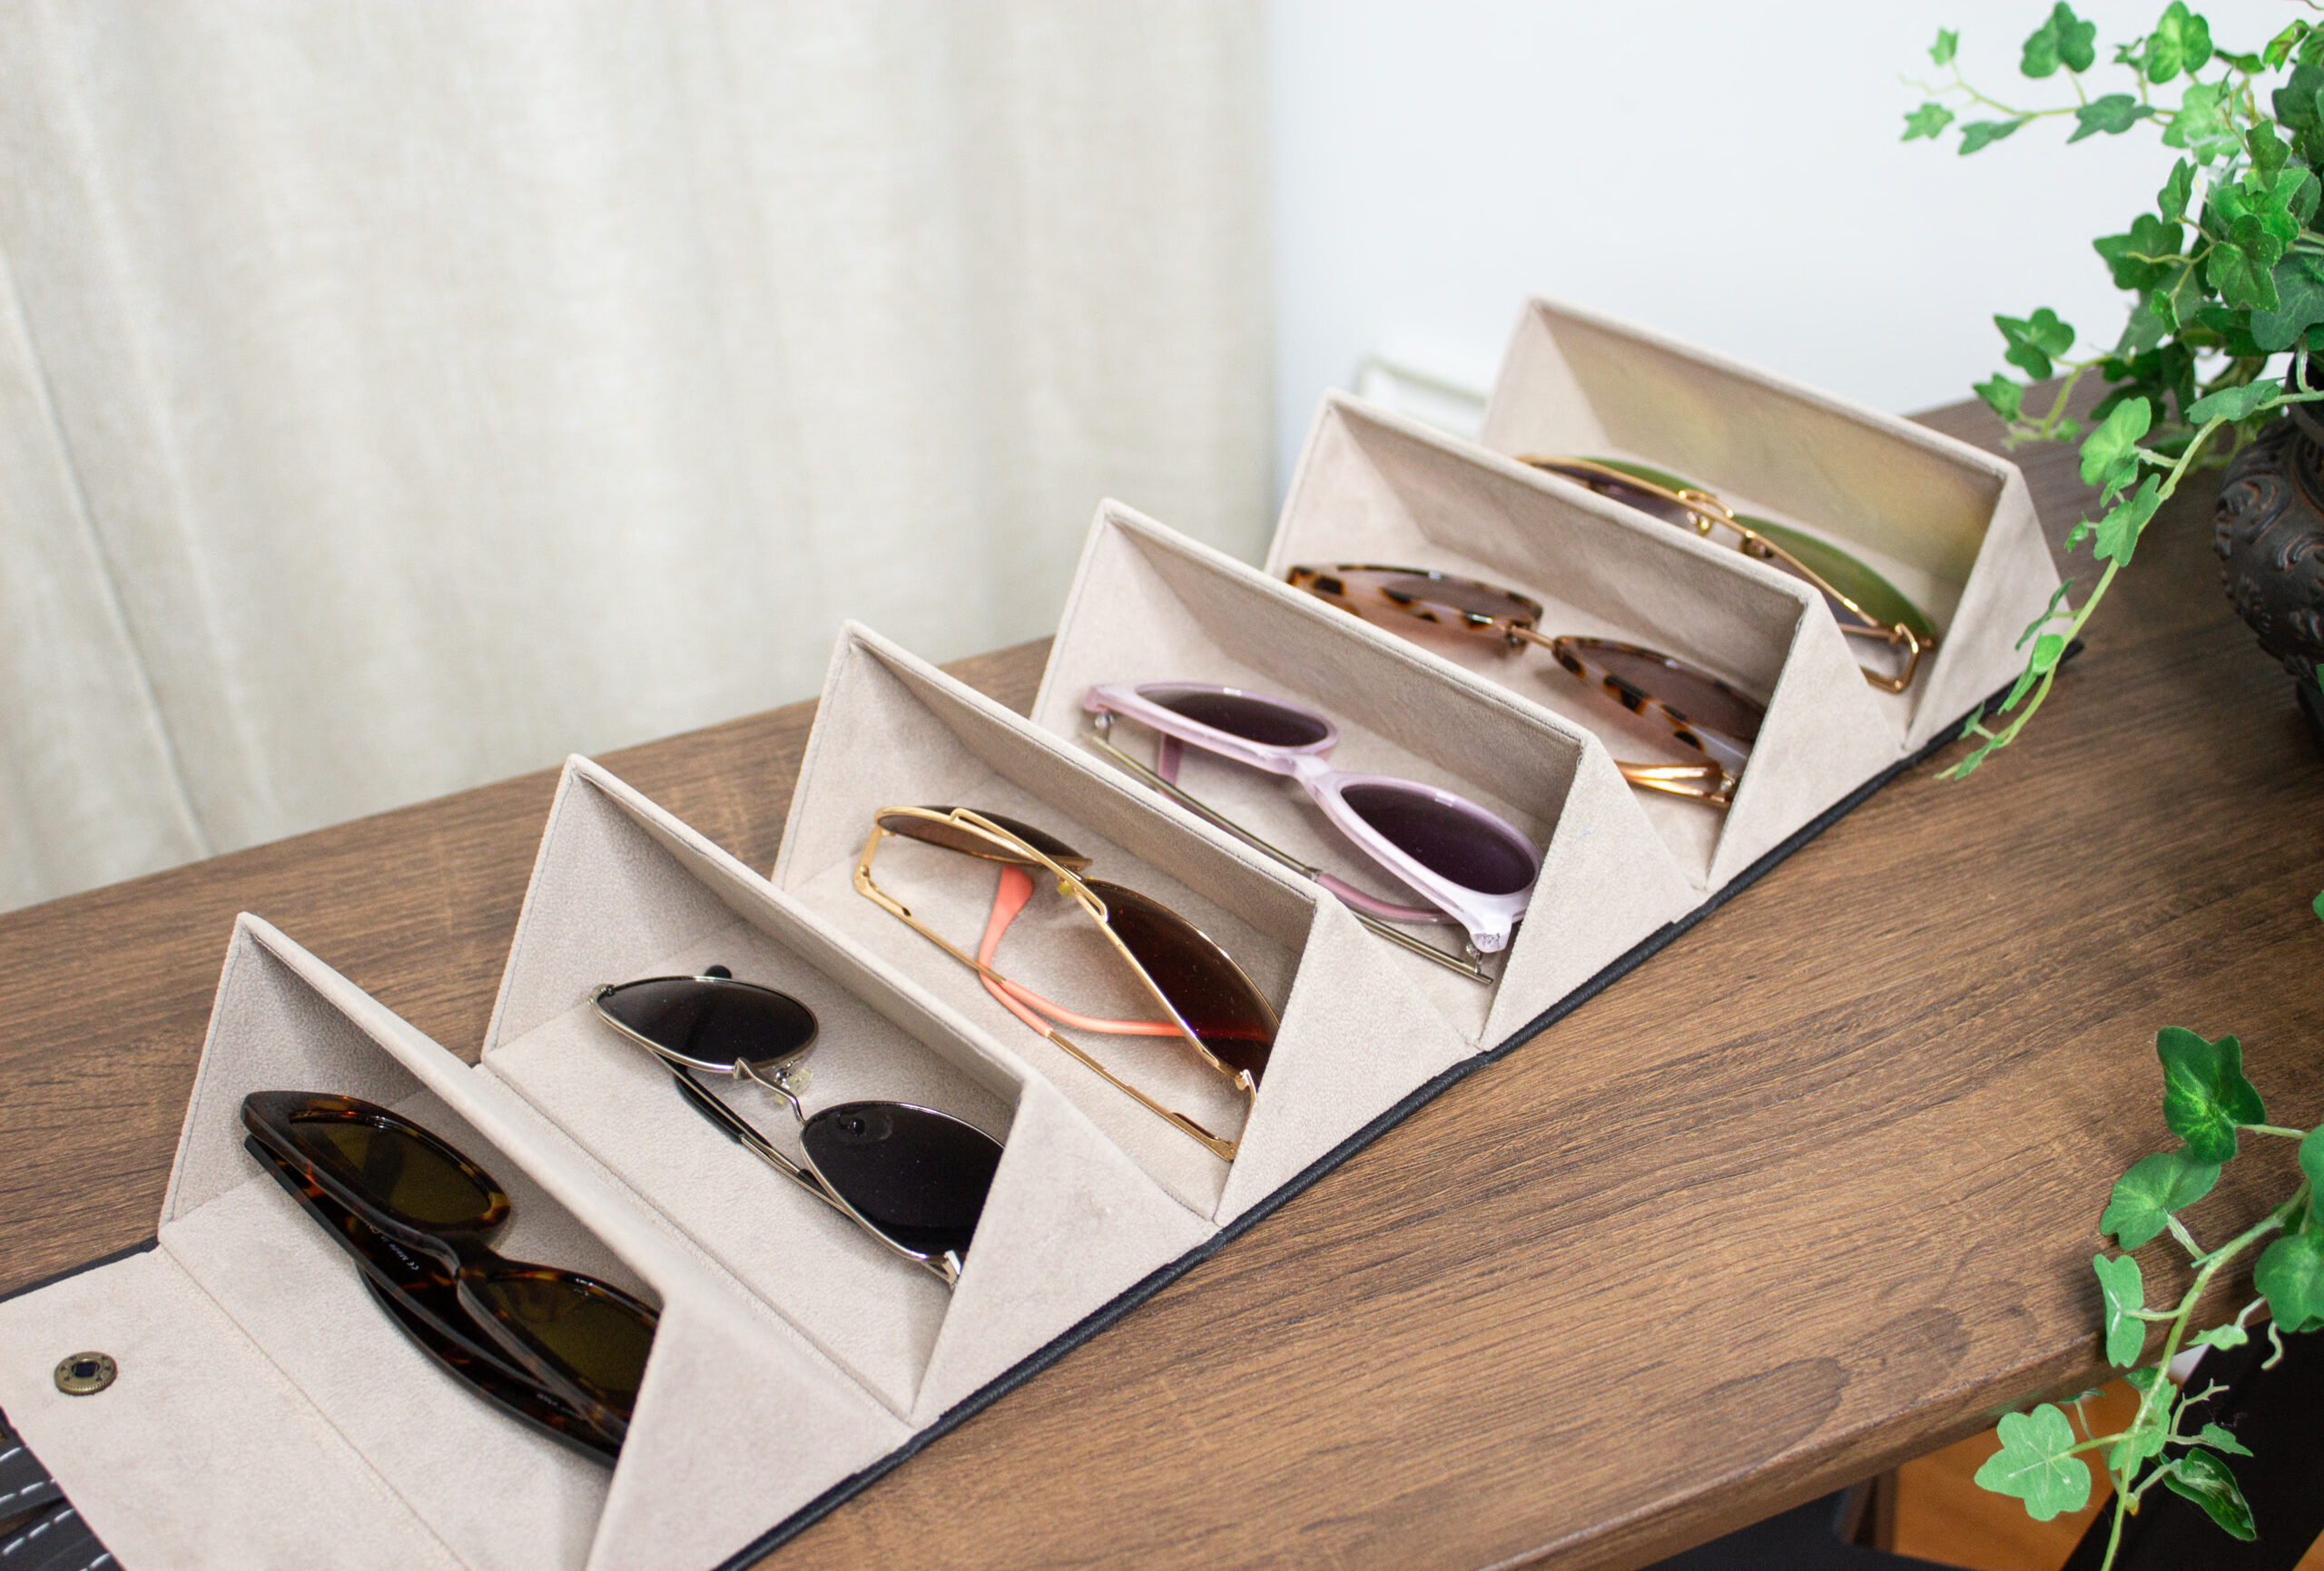 Close-up view of the Livtor Sunglasses Organizer, showcasing an elegant and efficient eyewear storage solution. Neatly organized sunglasses within the organizer, highlighting both style and functionality. 2 Image: Partial view of the Livtor Sunglasses Organizer in a semi-closed state, offering a glimpse of the sleek design and efficient eyewear storage. Closed-up presentation captures the elegance and functionality of this stylish eyewear organizer with neatly arranged sunglasses.